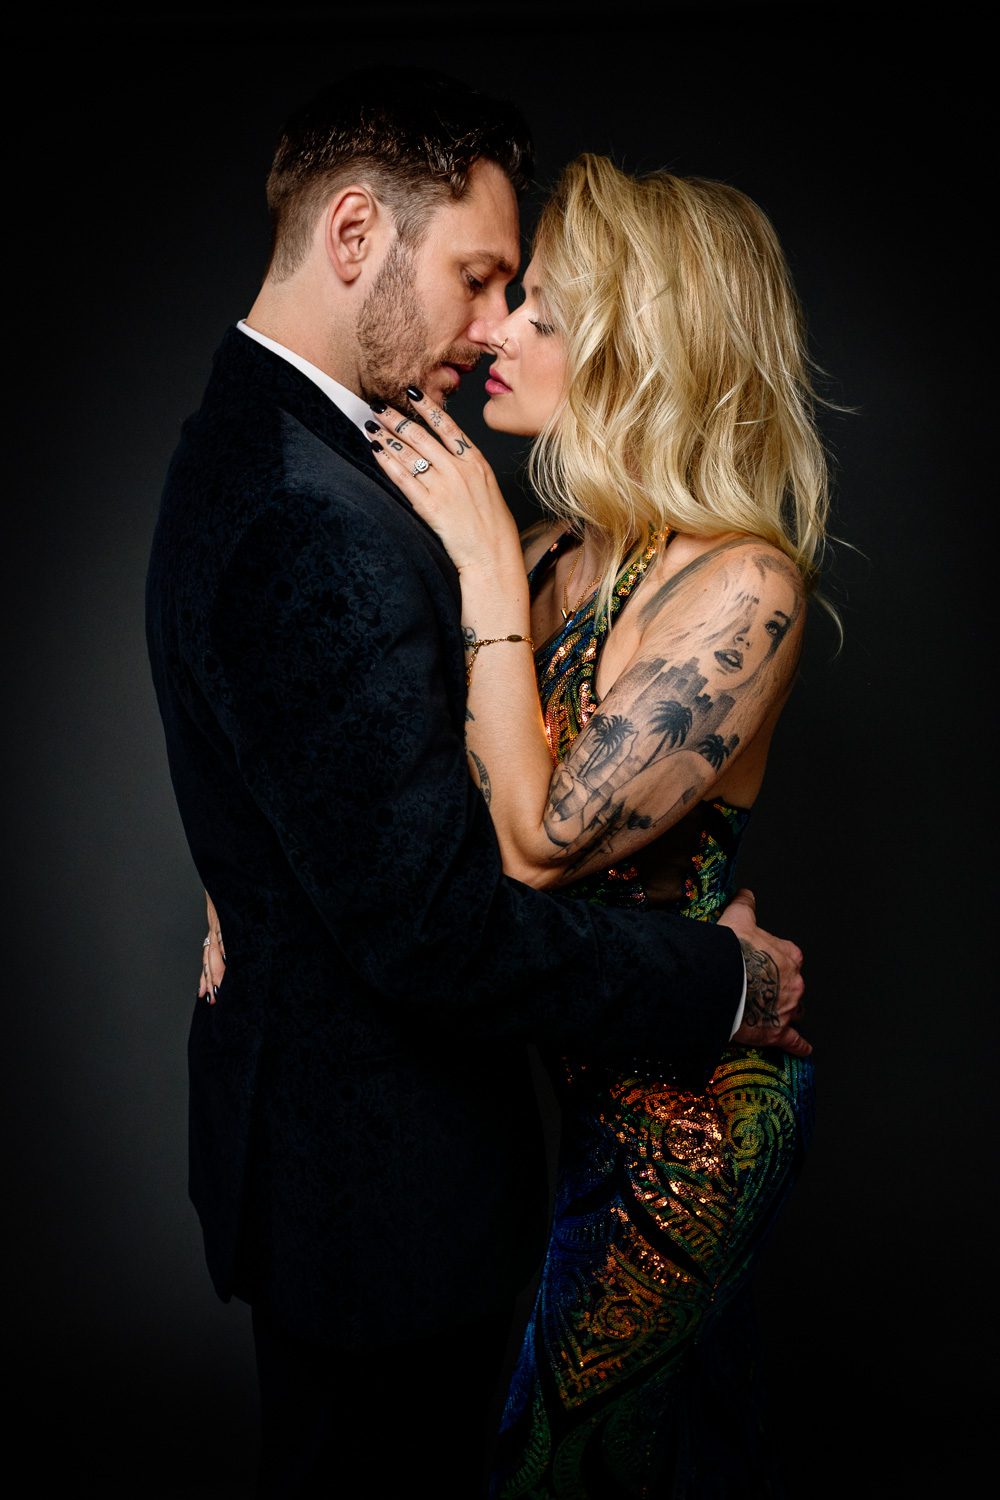 romantic couple wearing evening gown and suit photographed just before they kiss.